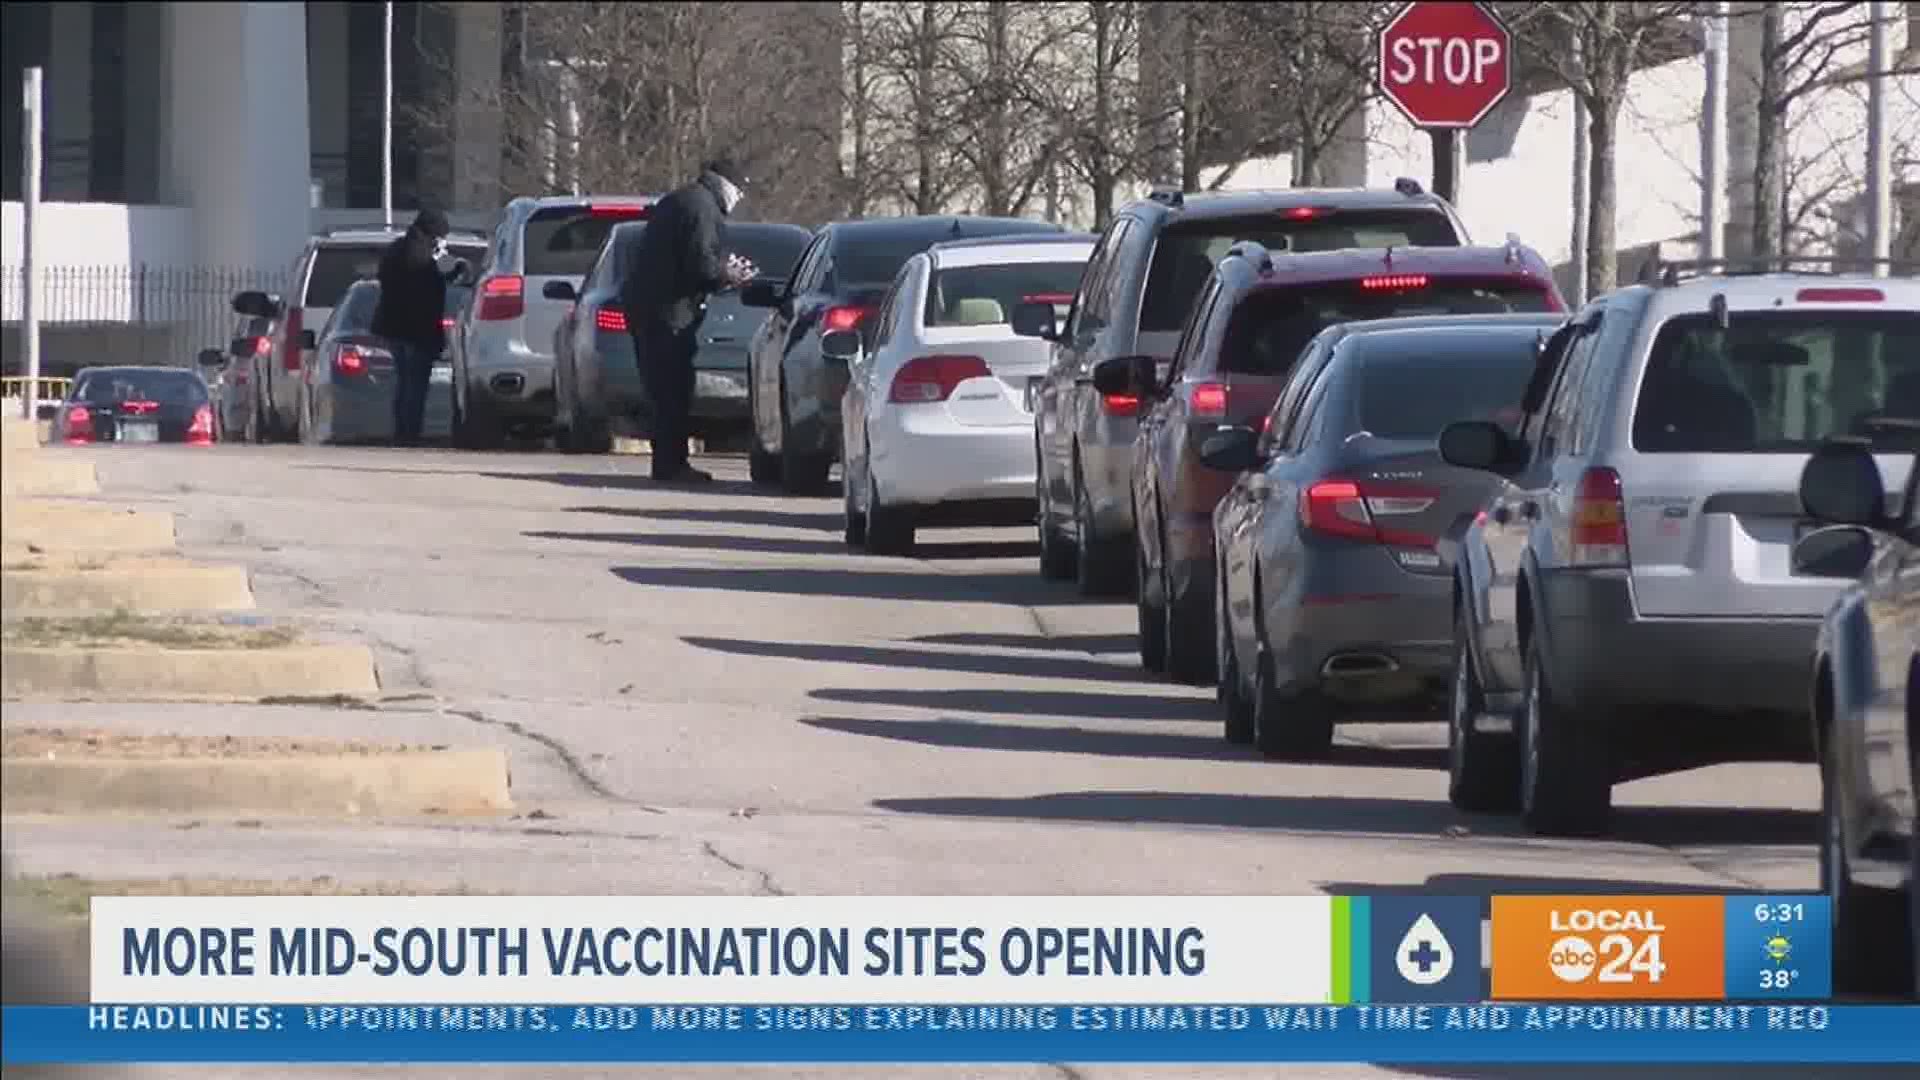 Last week, COVID-19 vaccination sites were met with long lines and wait times. Now, SCHD is planning a vaccination site in Germantown and Whitehaven